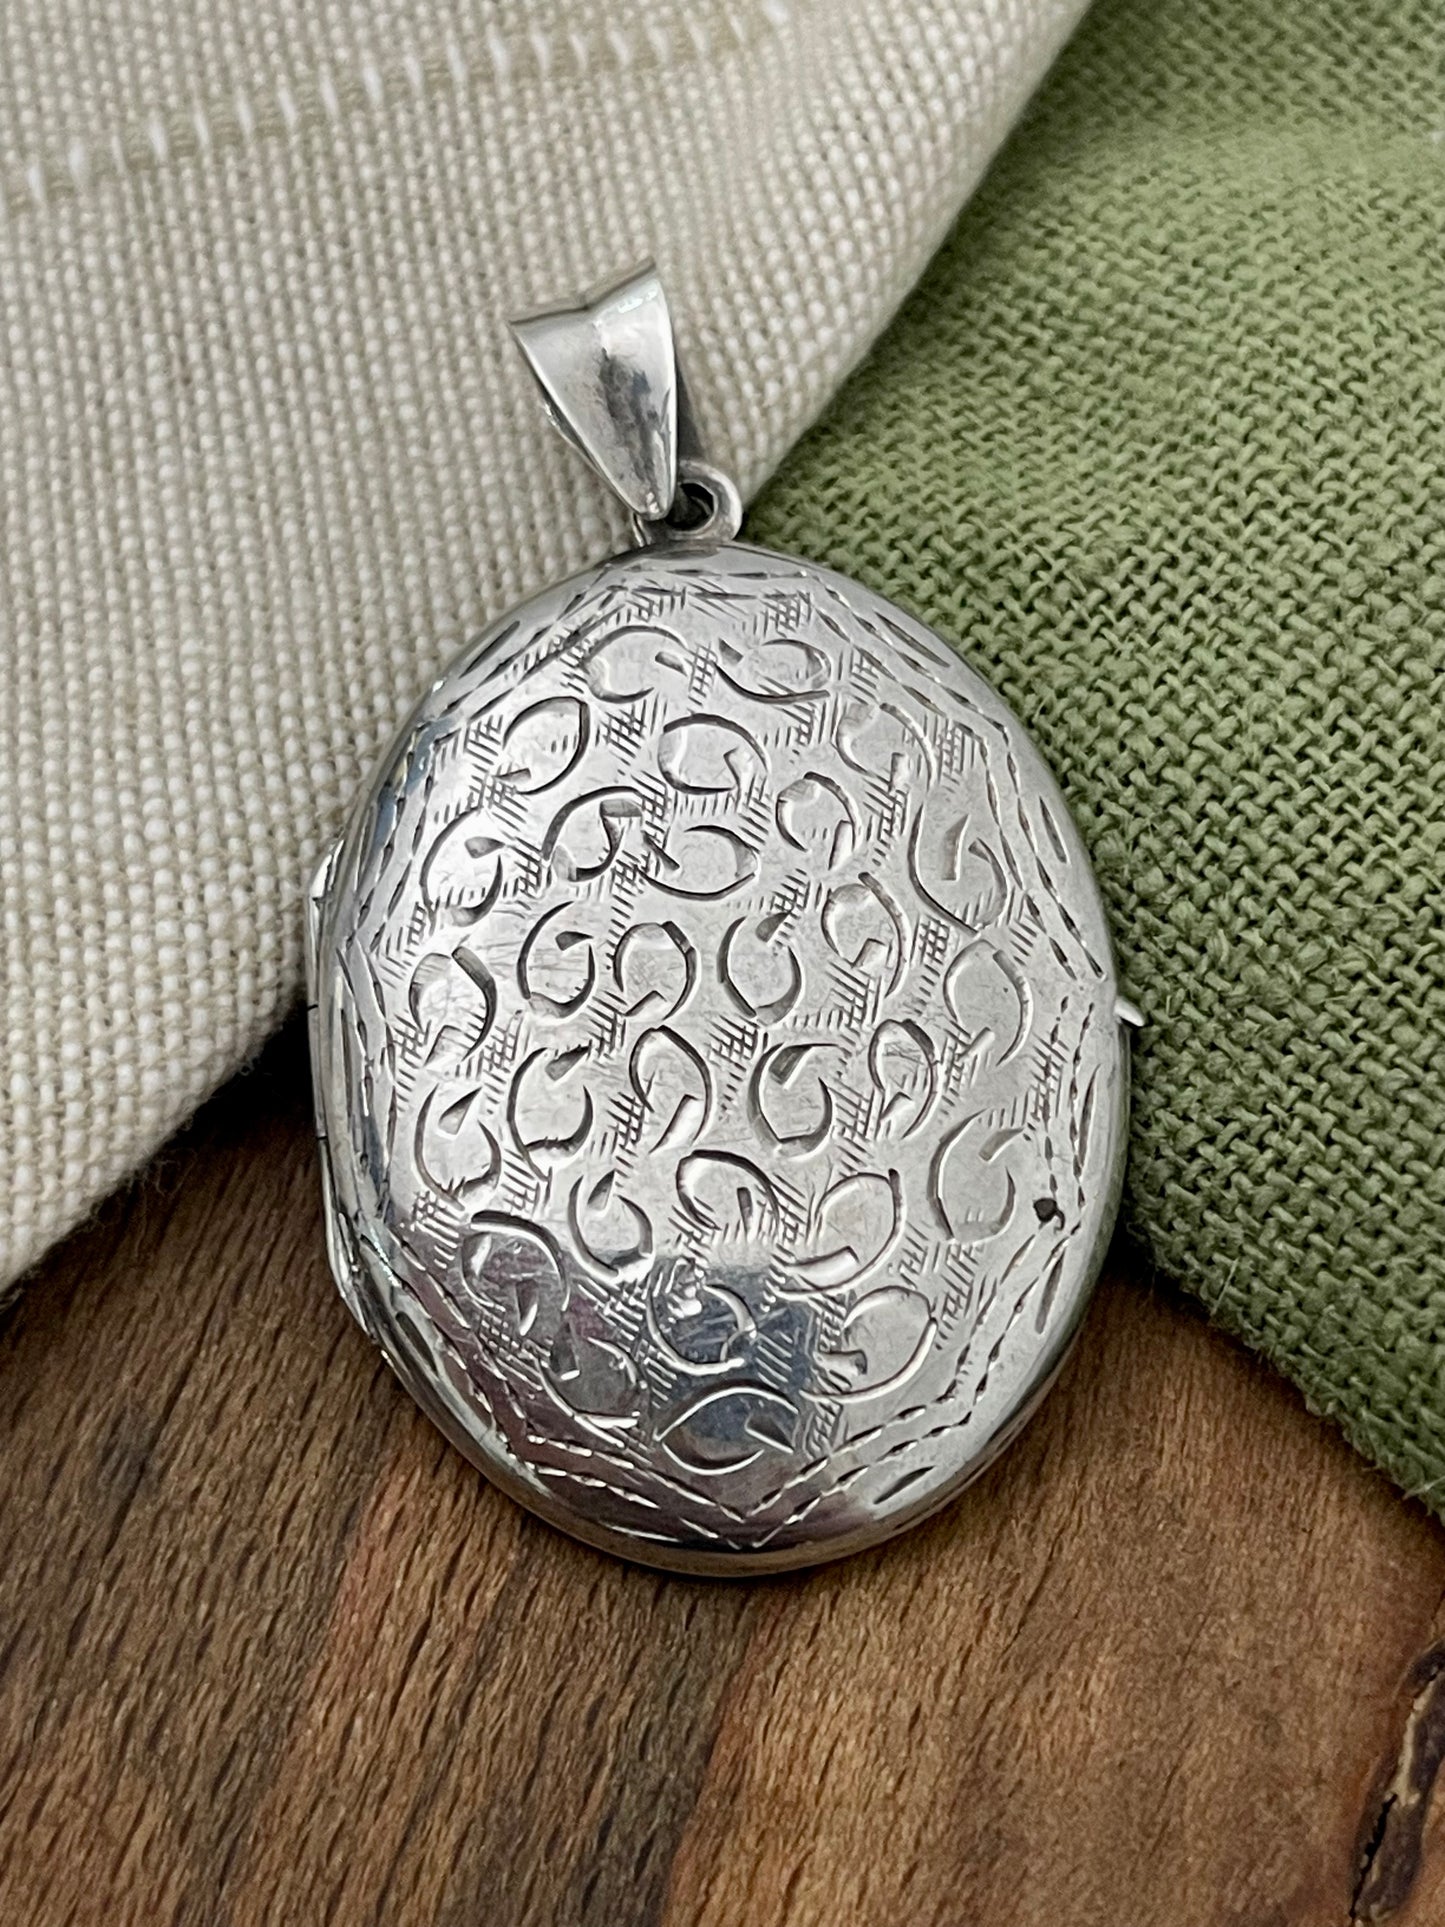 Photograph Locket Pendant Solid Sterling 925 Silver Vintage Jewelry Photo Hair